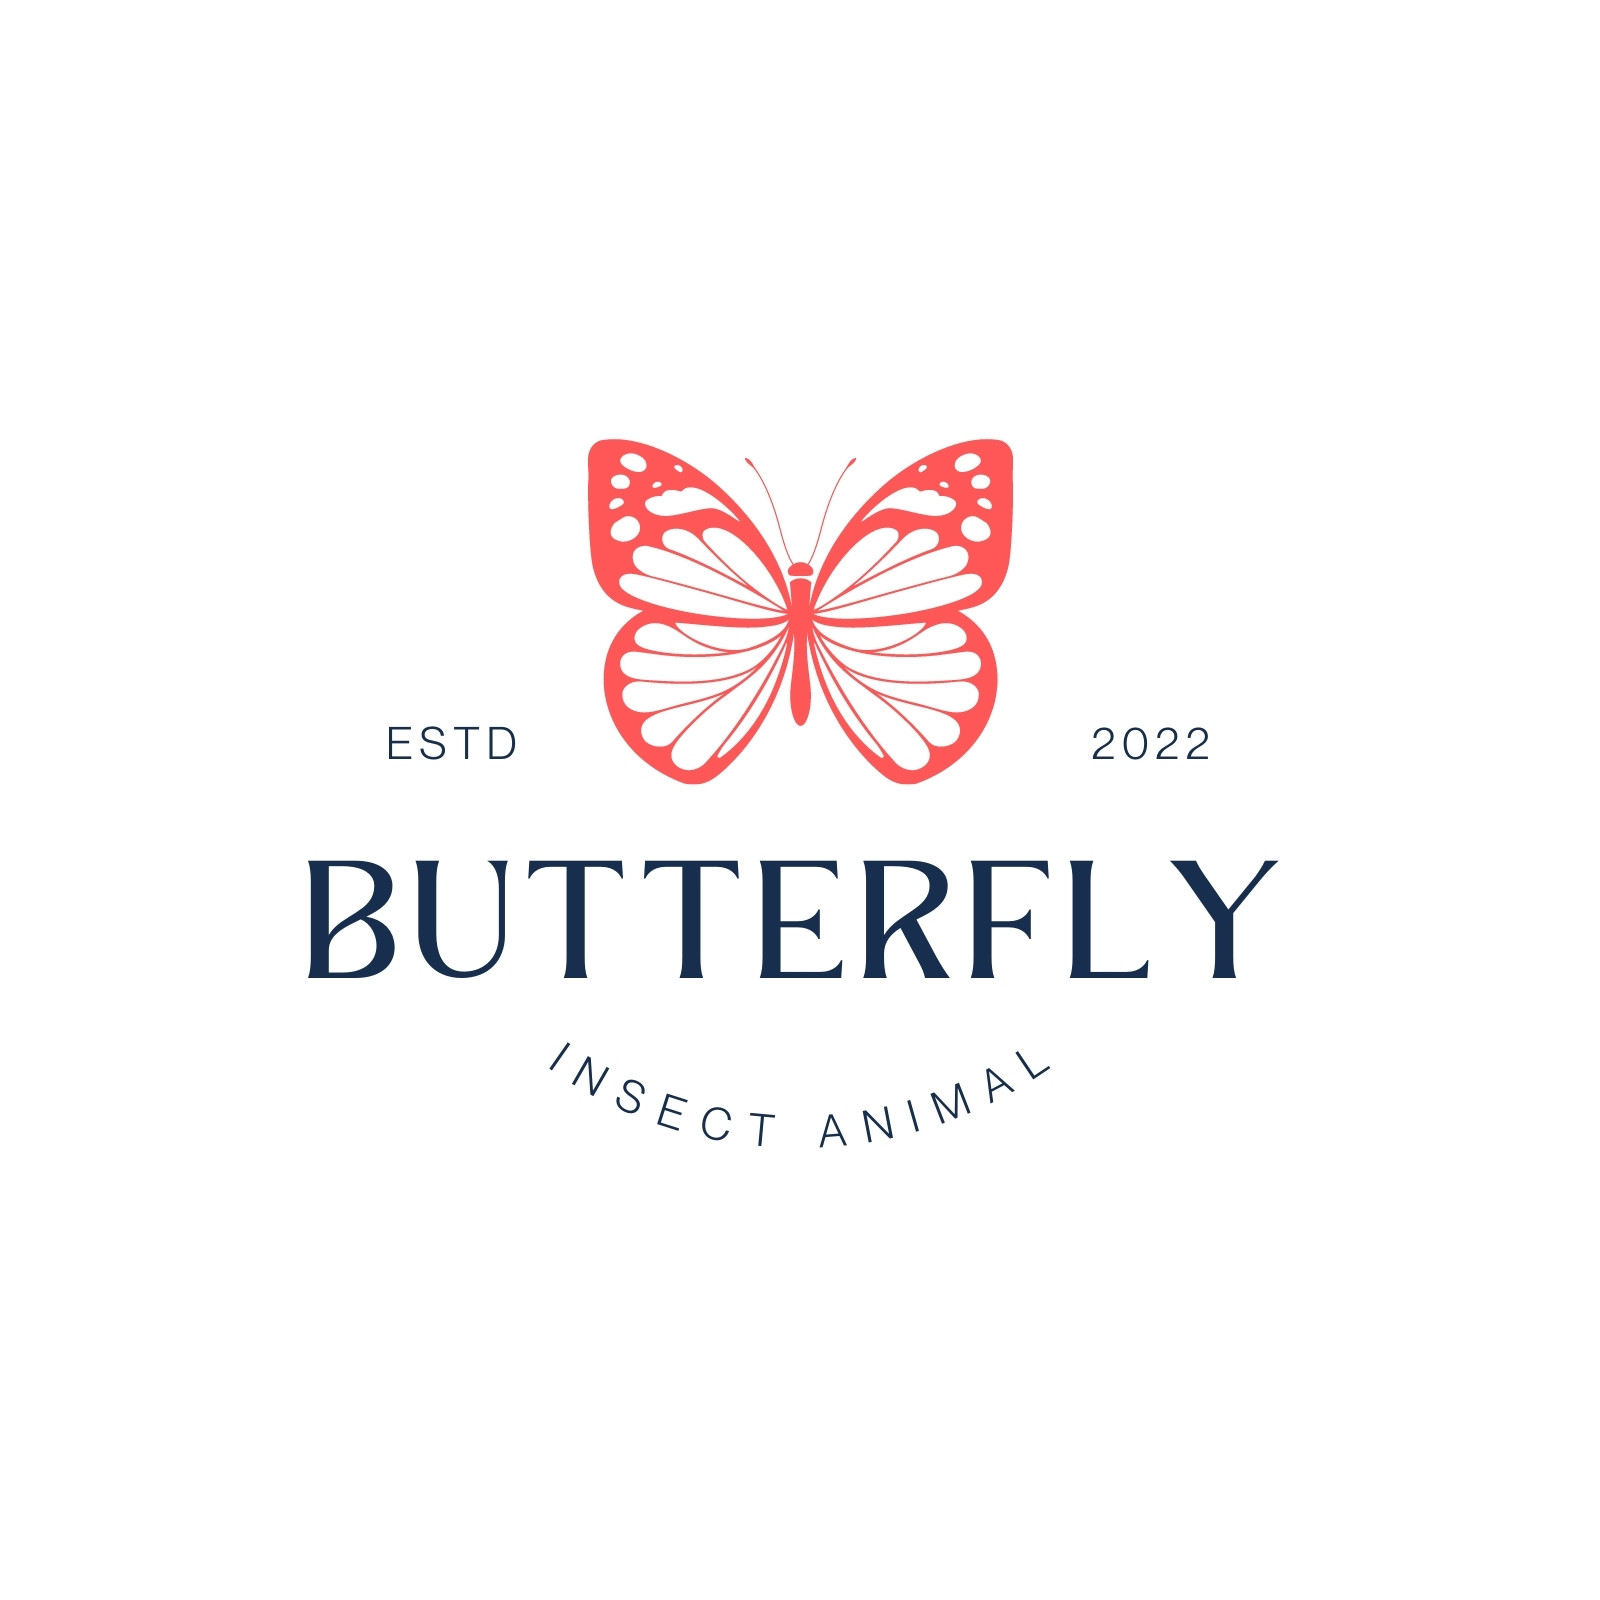 Butterfly. Clipart Transparent PNG Hd, Butterfly Vector Logo Design,  Illustration, Design, Butterfly PNG Image For Free Download